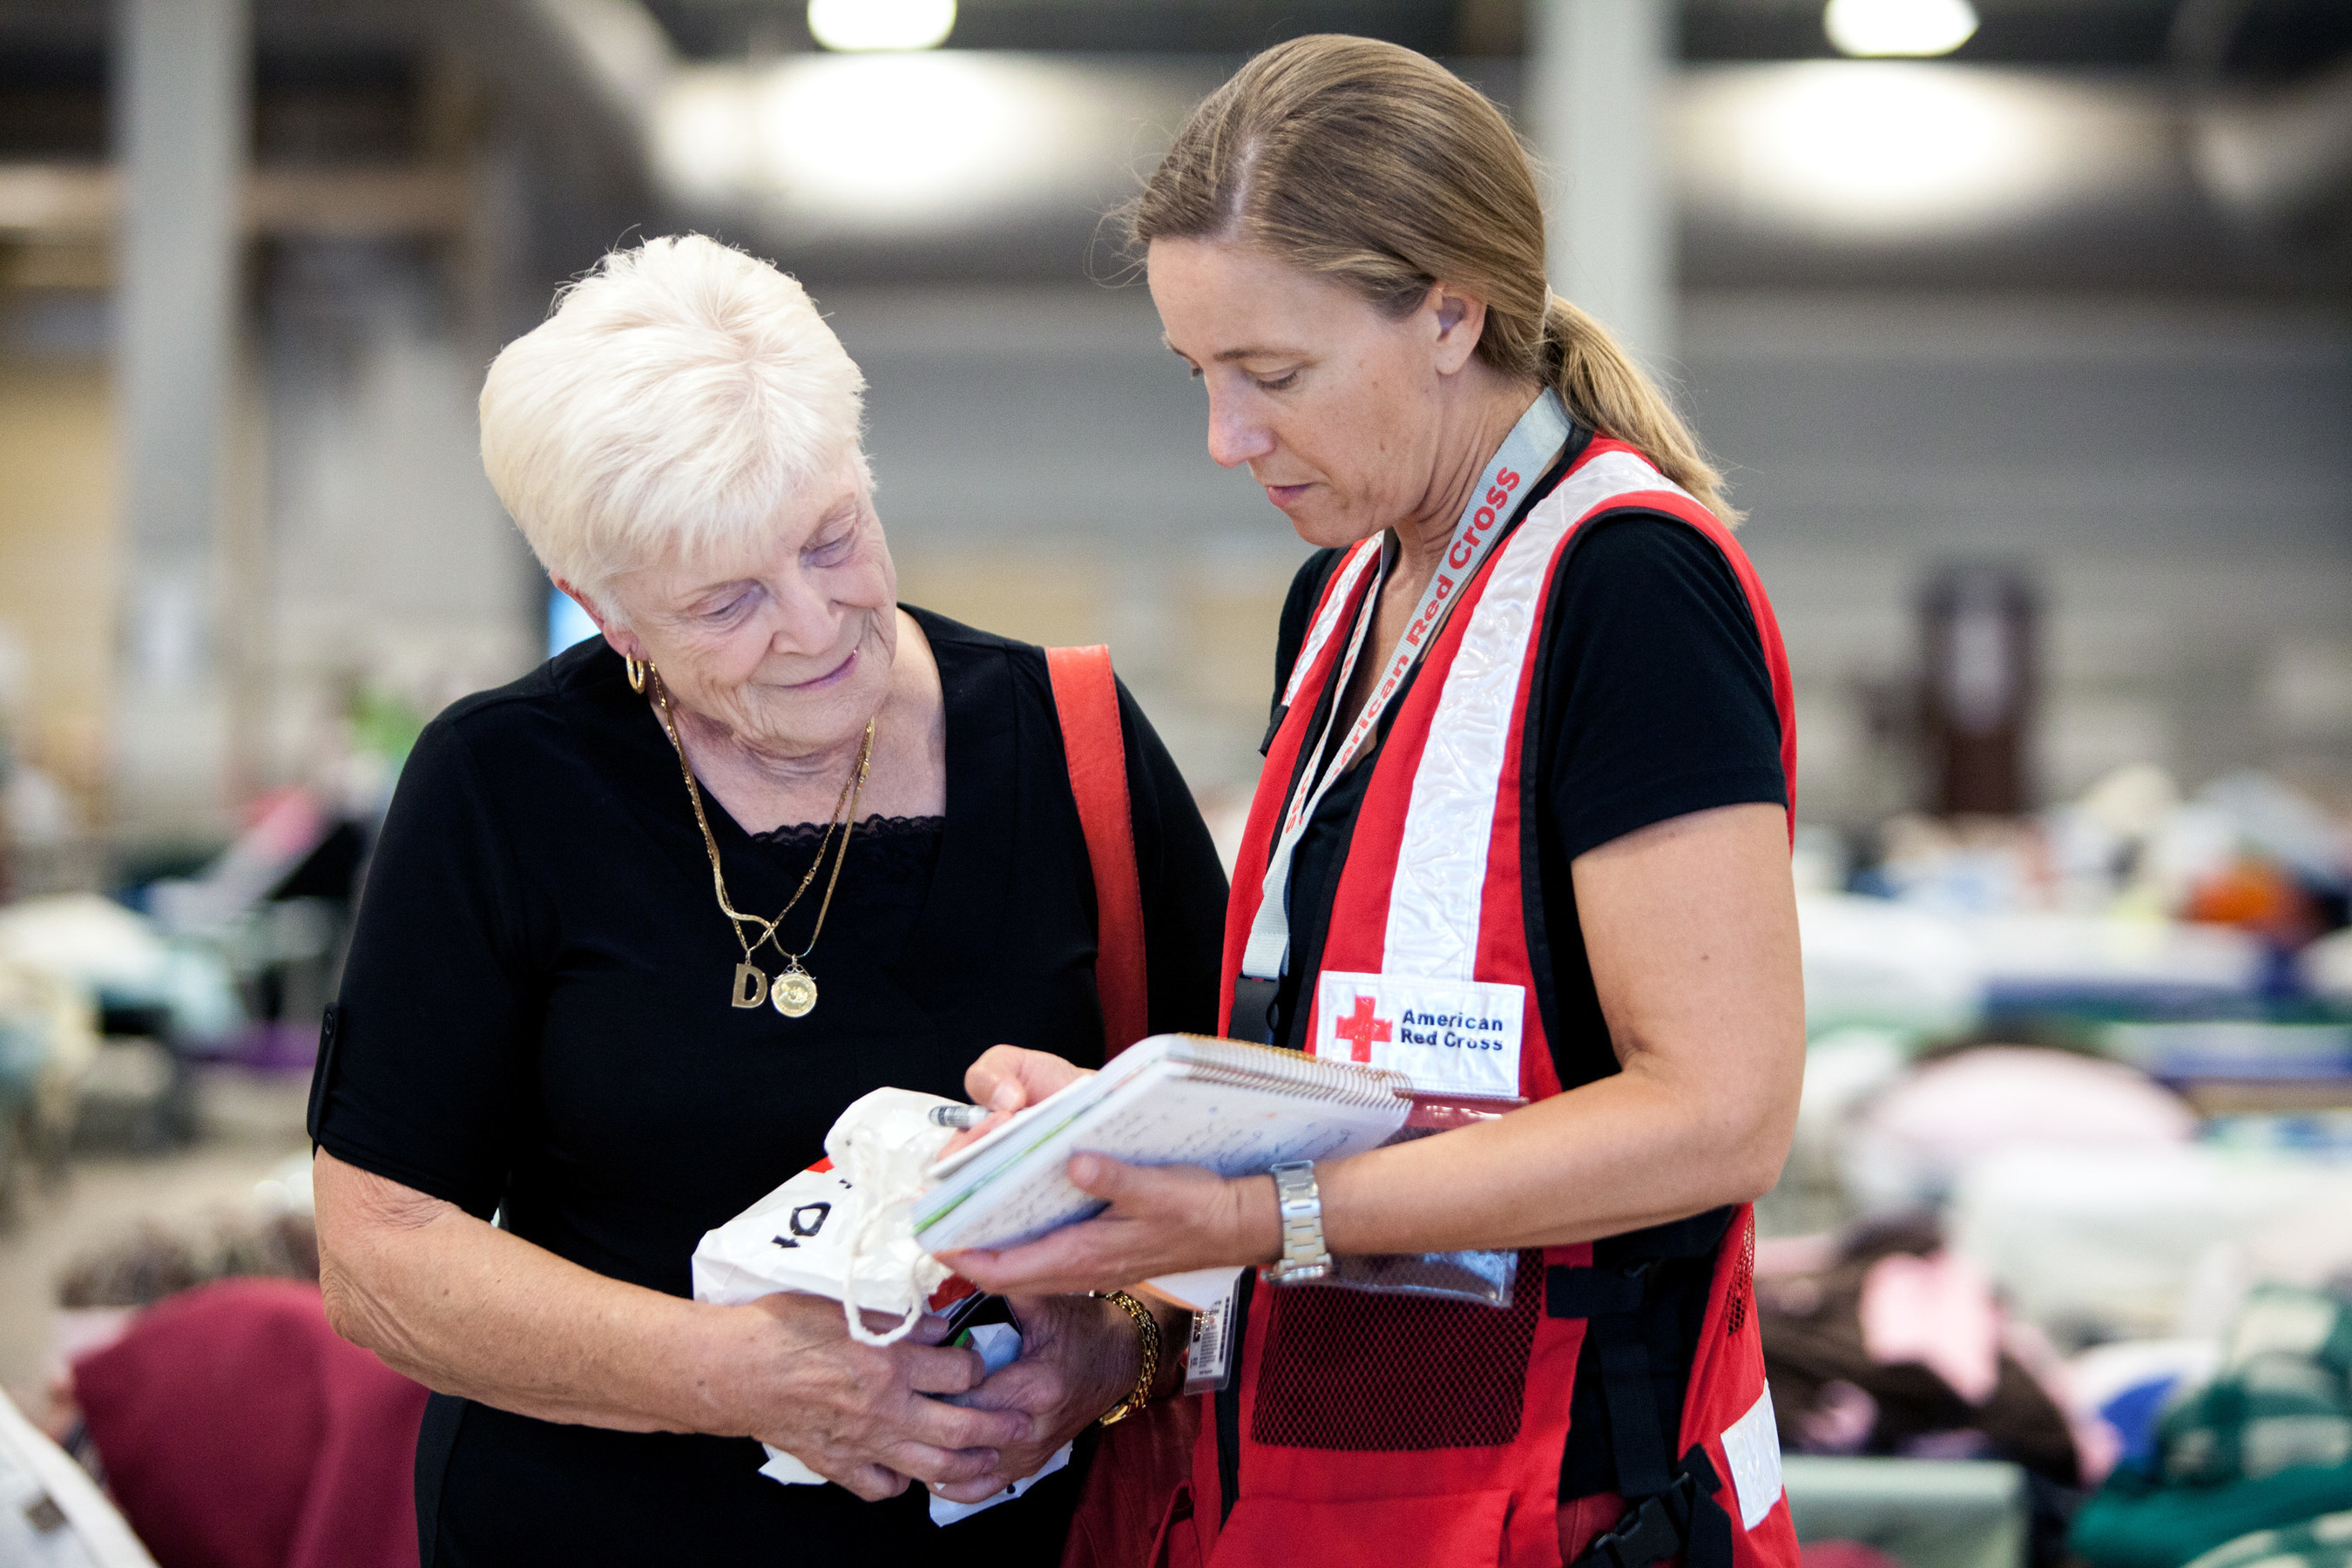 Doreen Ulm, 81, survived air raids in London during World War II, and now because of the flooding in Louisiana, she's at a shelter for the first time since the war. She shared her story with Red Cross relief worker Lynette Nyman, at the Red Cross shelter in Gonzales, Louisiana. Red Cross Photo by Marko Kokic